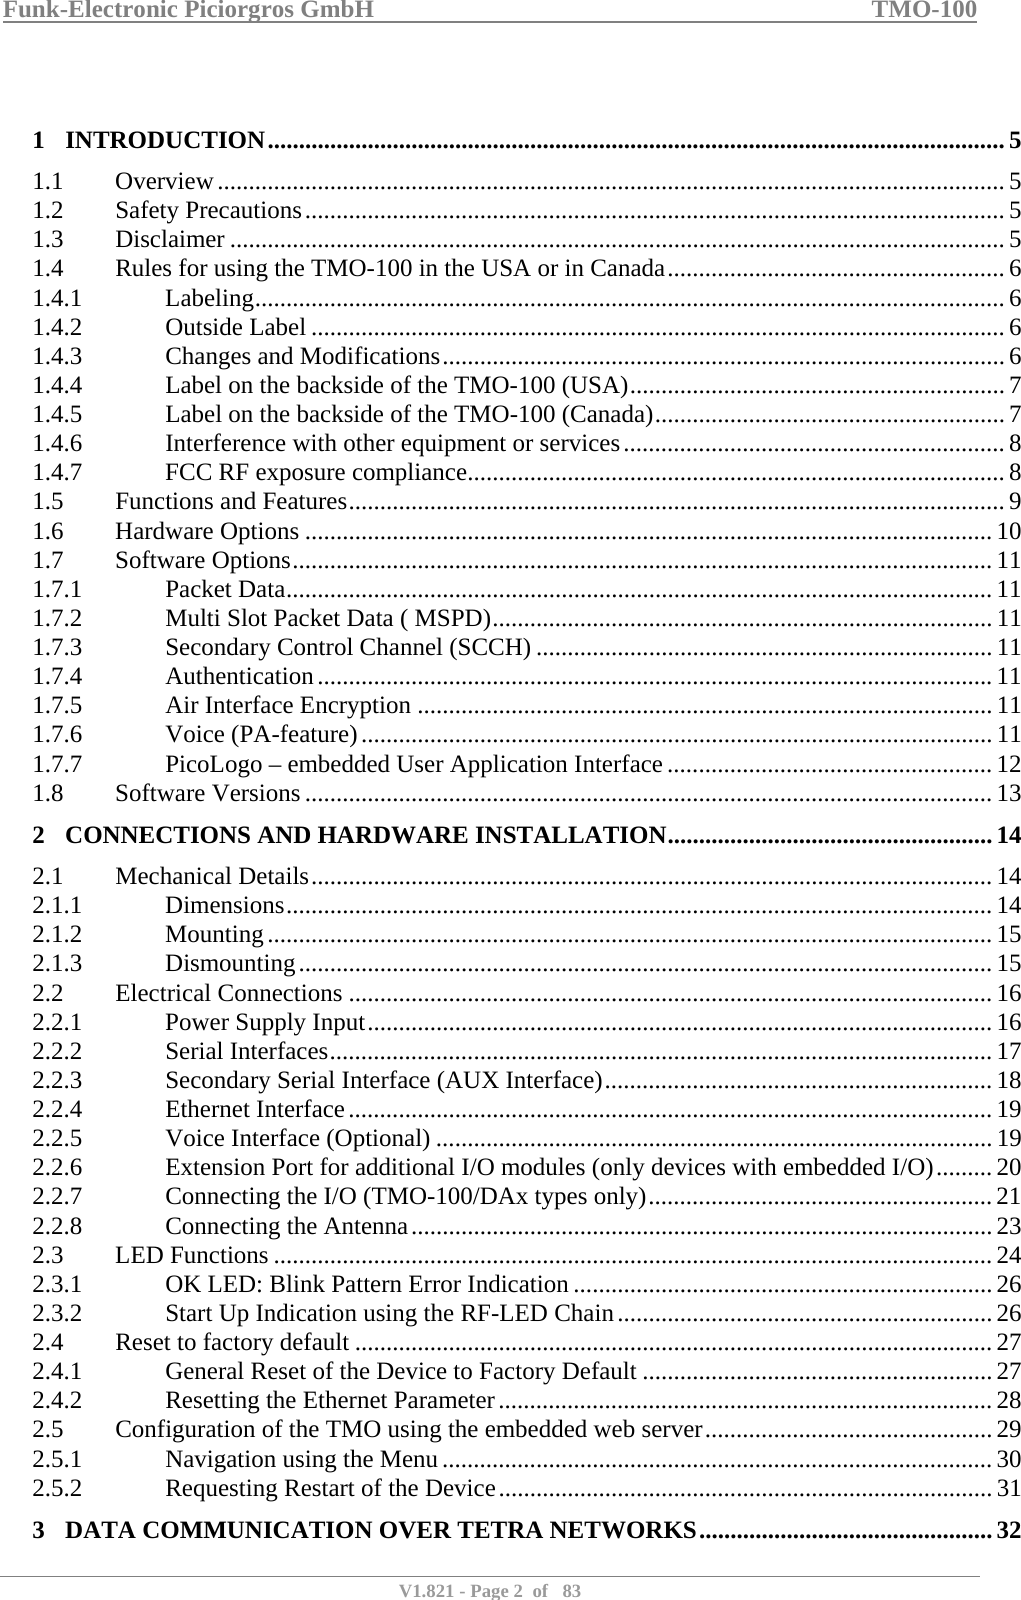 Funk-Electronic Piciorgros GmbH   TMO-100   V1.821 - Page 2  of   83    1 INTRODUCTION...................................................................................................................... 5 1.1 Overview.............................................................................................................................. 5 1.2 Safety Precautions................................................................................................................ 5 1.3 Disclaimer ............................................................................................................................5 1.4  Rules for using the TMO-100 in the USA or in Canada......................................................6 1.4.1 Labeling........................................................................................................................ 6 1.4.2 Outside Label ...............................................................................................................6 1.4.3  Changes and Modifications..........................................................................................6 1.4.4  Label on the backside of the TMO-100 (USA)............................................................ 7 1.4.5  Label on the backside of the TMO-100 (Canada)........................................................7 1.4.6  Interference with other equipment or services............................................................. 8 1.4.7  FCC RF exposure compliance...................................................................................... 8 1.5  Functions and Features......................................................................................................... 9 1.6 Hardware Options .............................................................................................................. 10 1.7 Software Options................................................................................................................ 11 1.7.1 Packet Data.................................................................................................................11 1.7.2  Multi Slot Packet Data ( MSPD)................................................................................ 11 1.7.3  Secondary Control Channel (SCCH) ......................................................................... 11 1.7.4 Authentication............................................................................................................11 1.7.5  Air Interface Encryption ............................................................................................11 1.7.6 Voice (PA-feature)..................................................................................................... 11 1.7.7  PicoLogo – embedded User Application Interface.................................................... 12 1.8 Software Versions .............................................................................................................. 13 2 CONNECTIONS AND HARDWARE INSTALLATION.................................................... 14 2.1 Mechanical Details............................................................................................................. 14 2.1.1 Dimensions................................................................................................................. 14 2.1.2 Mounting.................................................................................................................... 15 2.1.3 Dismounting............................................................................................................... 15 2.2 Electrical Connections .......................................................................................................16 2.2.1  Power Supply Input....................................................................................................16 2.2.2 Serial Interfaces..........................................................................................................17 2.2.3  Secondary Serial Interface (AUX Interface).............................................................. 18 2.2.4 Ethernet Interface.......................................................................................................19 2.2.5  Voice Interface (Optional) .........................................................................................19 2.2.6  Extension Port for additional I/O modules (only devices with embedded I/O).........20 2.2.7  Connecting the I/O (TMO-100/DAx types only)....................................................... 21 2.2.8  Connecting the Antenna............................................................................................. 23 2.3 LED Functions ................................................................................................................... 24 2.3.1  OK LED: Blink Pattern Error Indication ................................................................... 26 2.3.2  Start Up Indication using the RF-LED Chain............................................................26 2.4  Reset to factory default ......................................................................................................27 2.4.1  General Reset of the Device to Factory Default ........................................................27 2.4.2  Resetting the Ethernet Parameter...............................................................................28 2.5  Configuration of the TMO using the embedded web server..............................................29 2.5.1  Navigation using the Menu........................................................................................ 30 2.5.2  Requesting Restart of the Device............................................................................... 31 3 DATA COMMUNICATION OVER TETRA NETWORKS...............................................32 